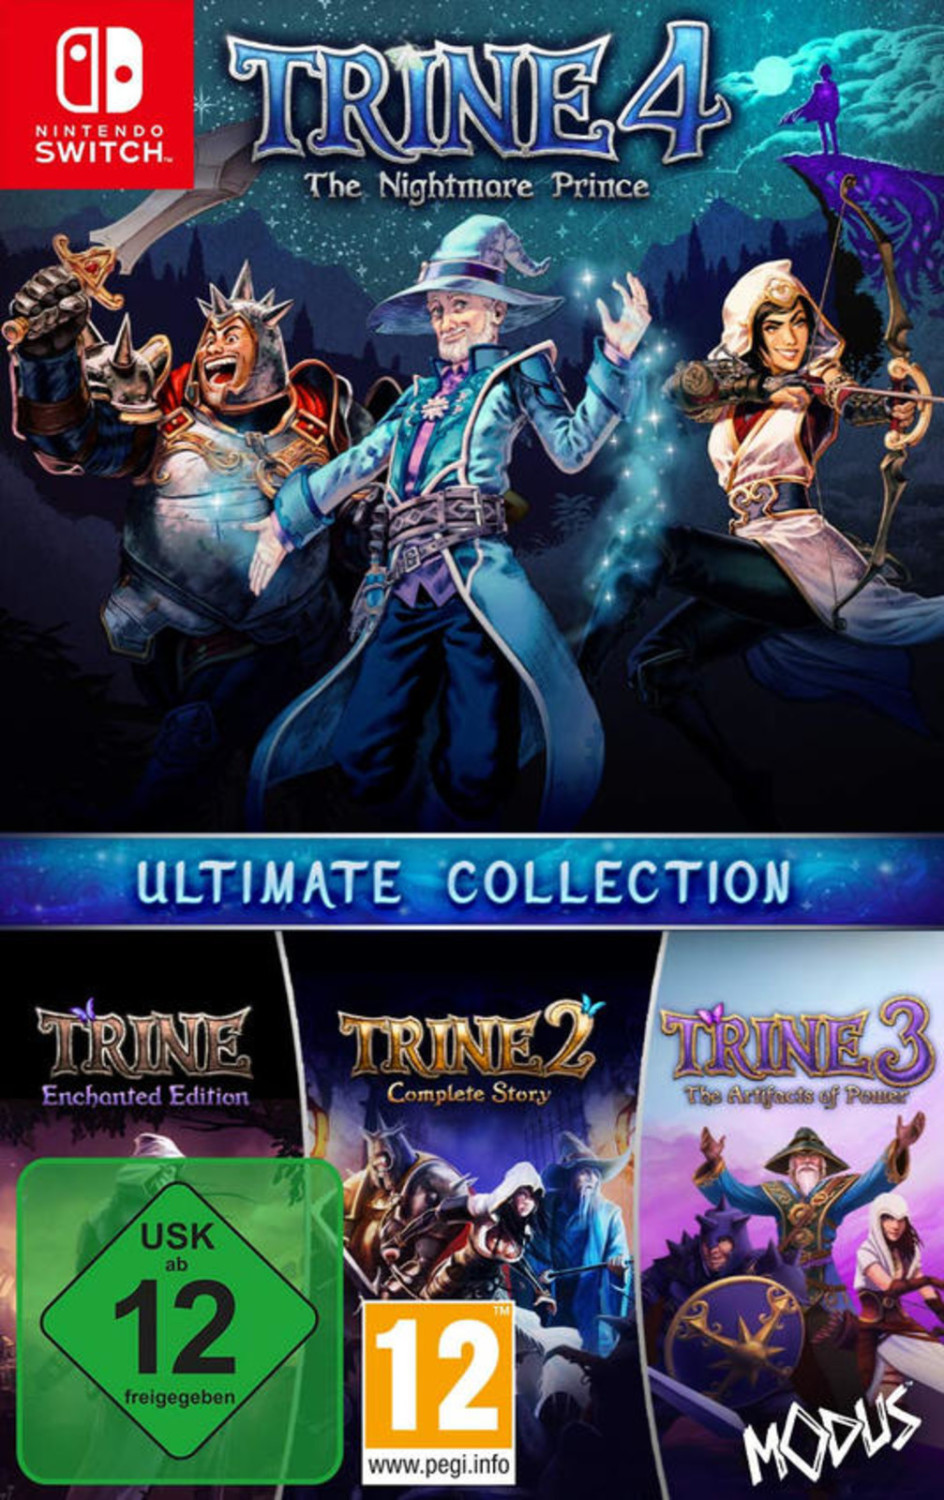 trine ultimate collection